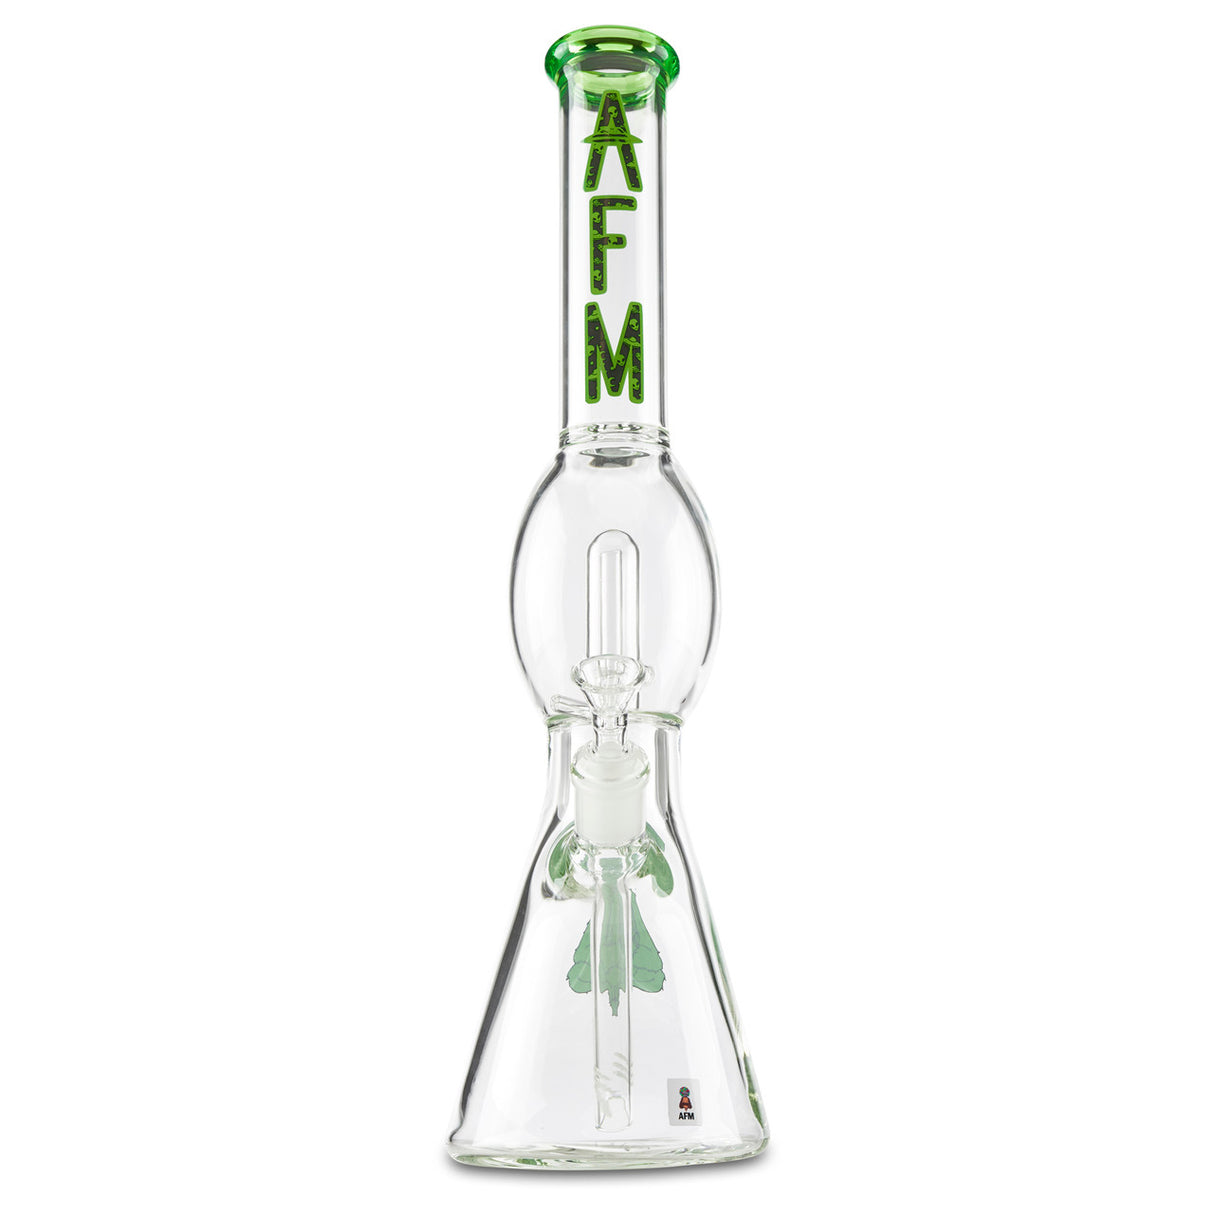 afm ufo perc water pipe dry herb glass bowl and downstem